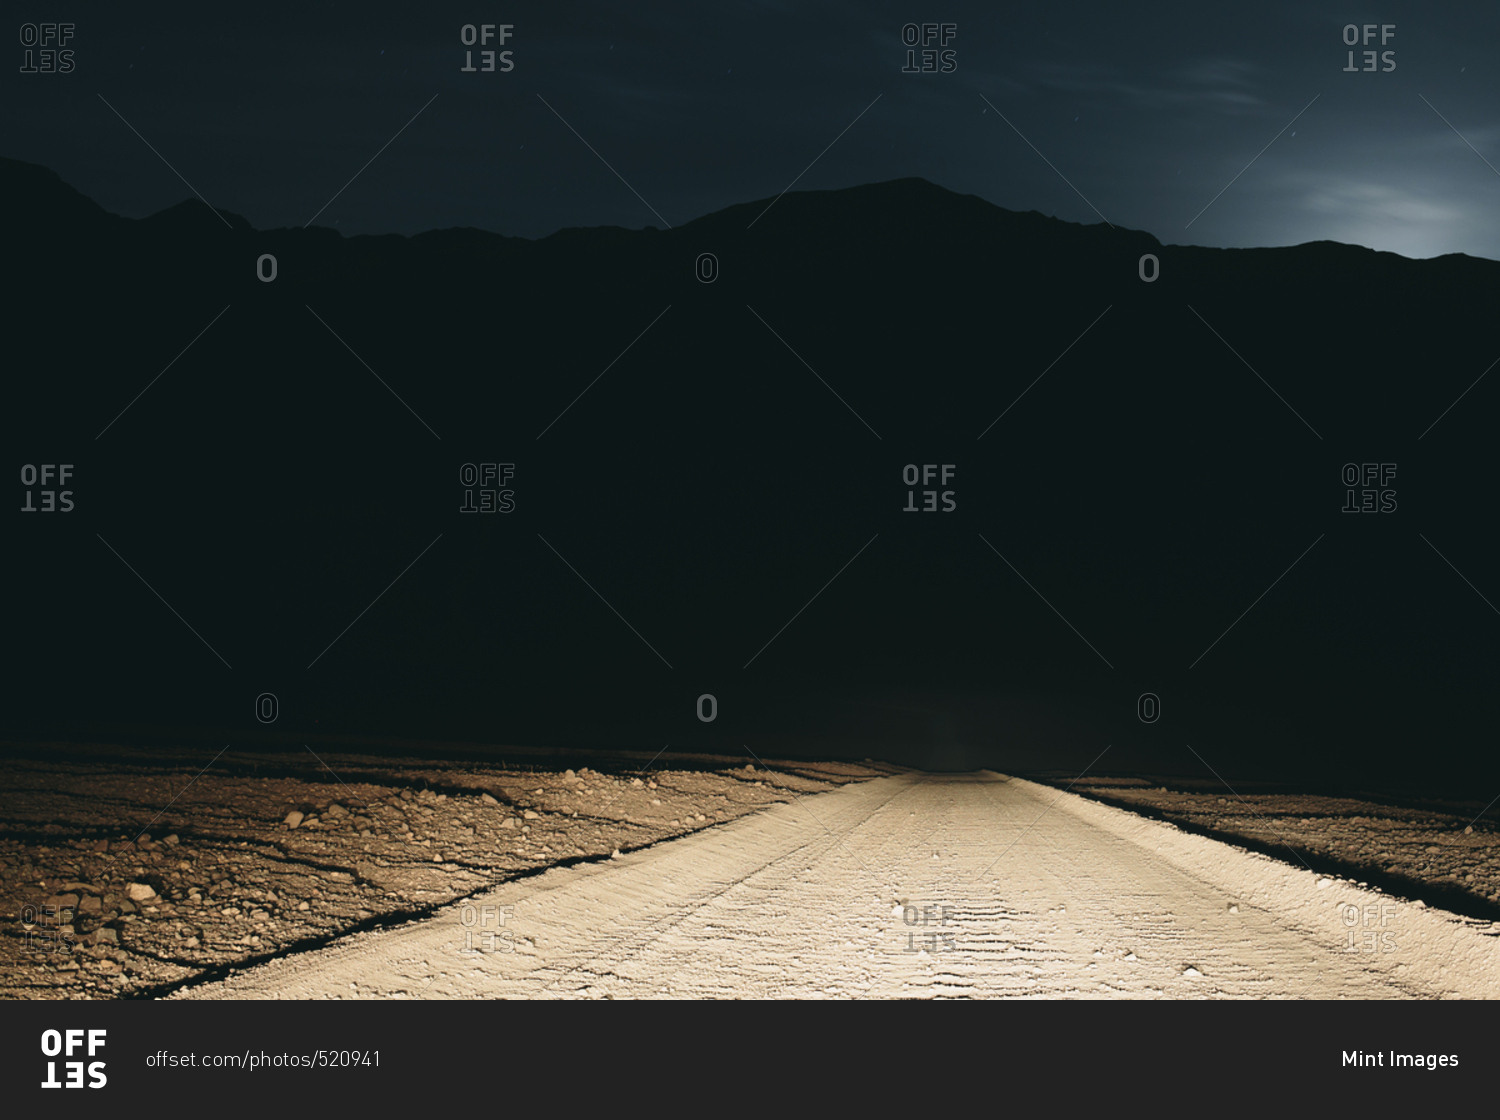 Dirt road in desert illuminated by car headlights, Death Valley National Park, USA, with moonlight in distance.